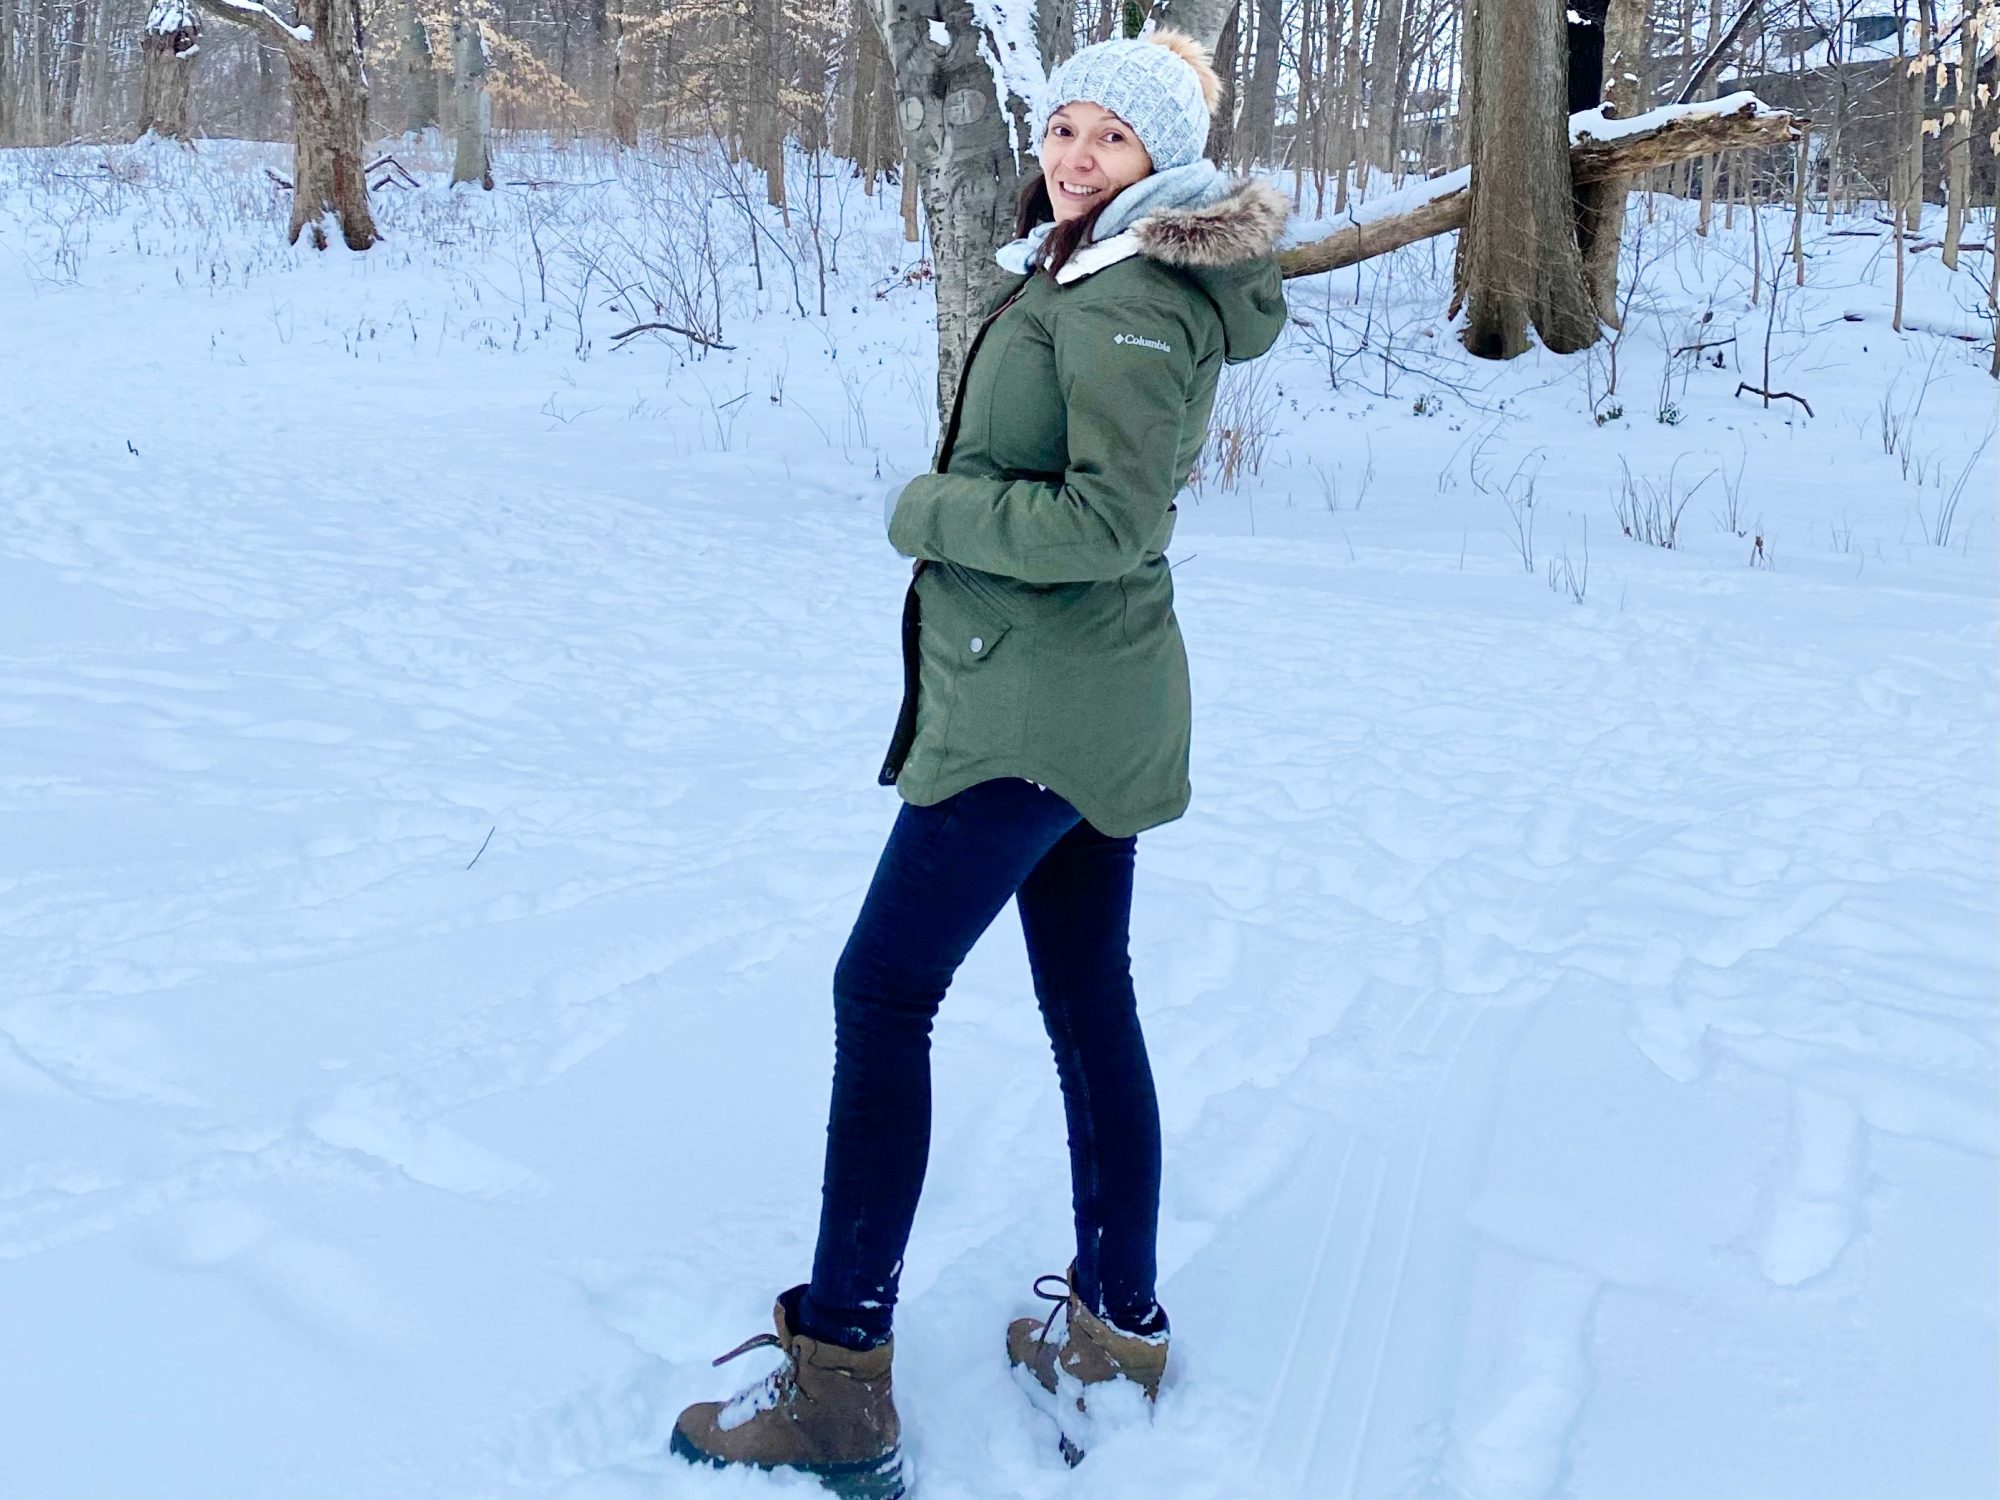 https://www.travelfashiongirl.com/wp-content/uploads/2021/01/what-to-wear-in-the-snow-cover.jpeg